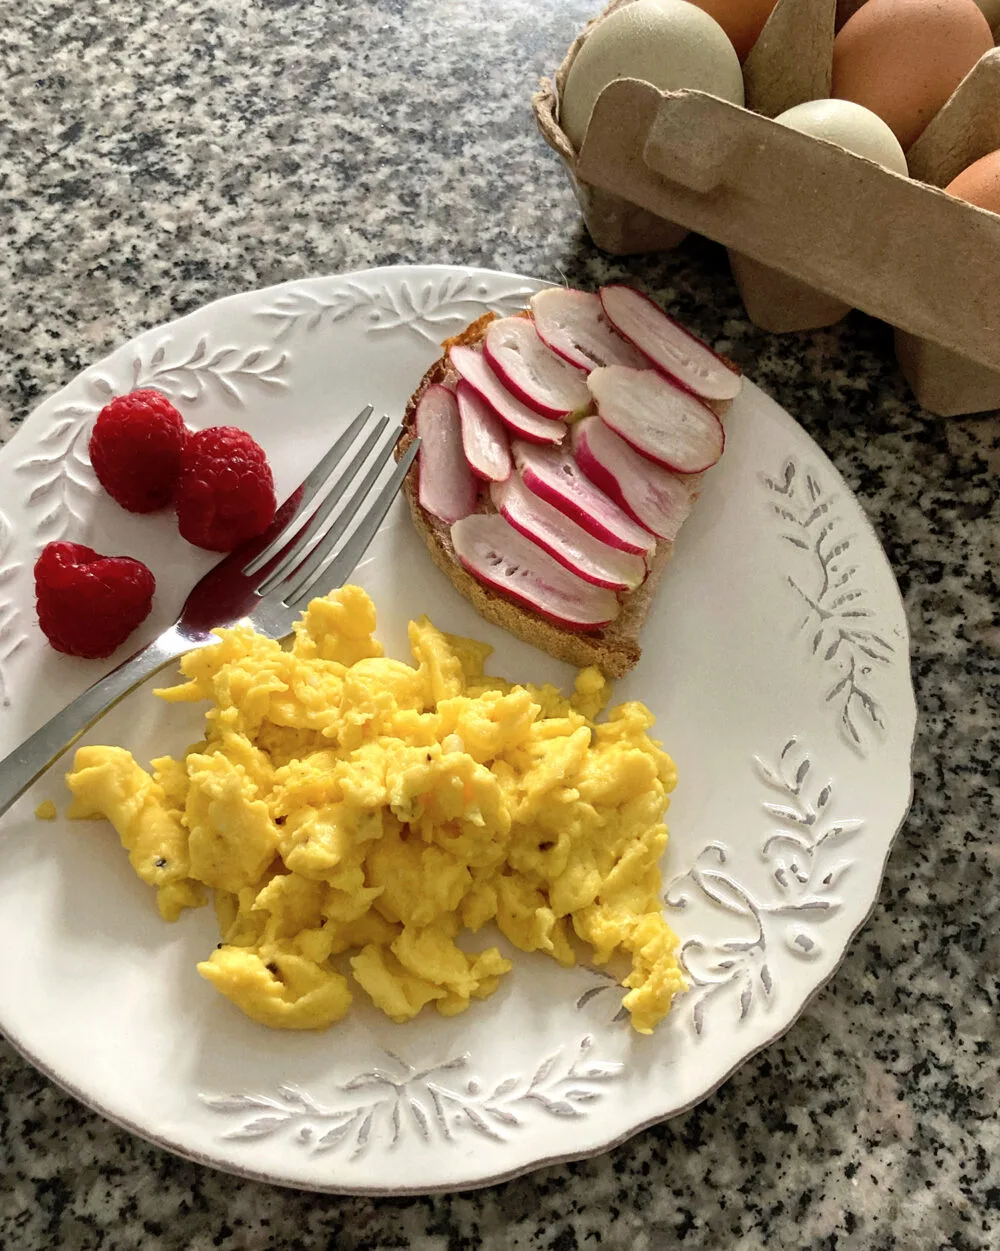 Perfect Scrambled Eggs for One